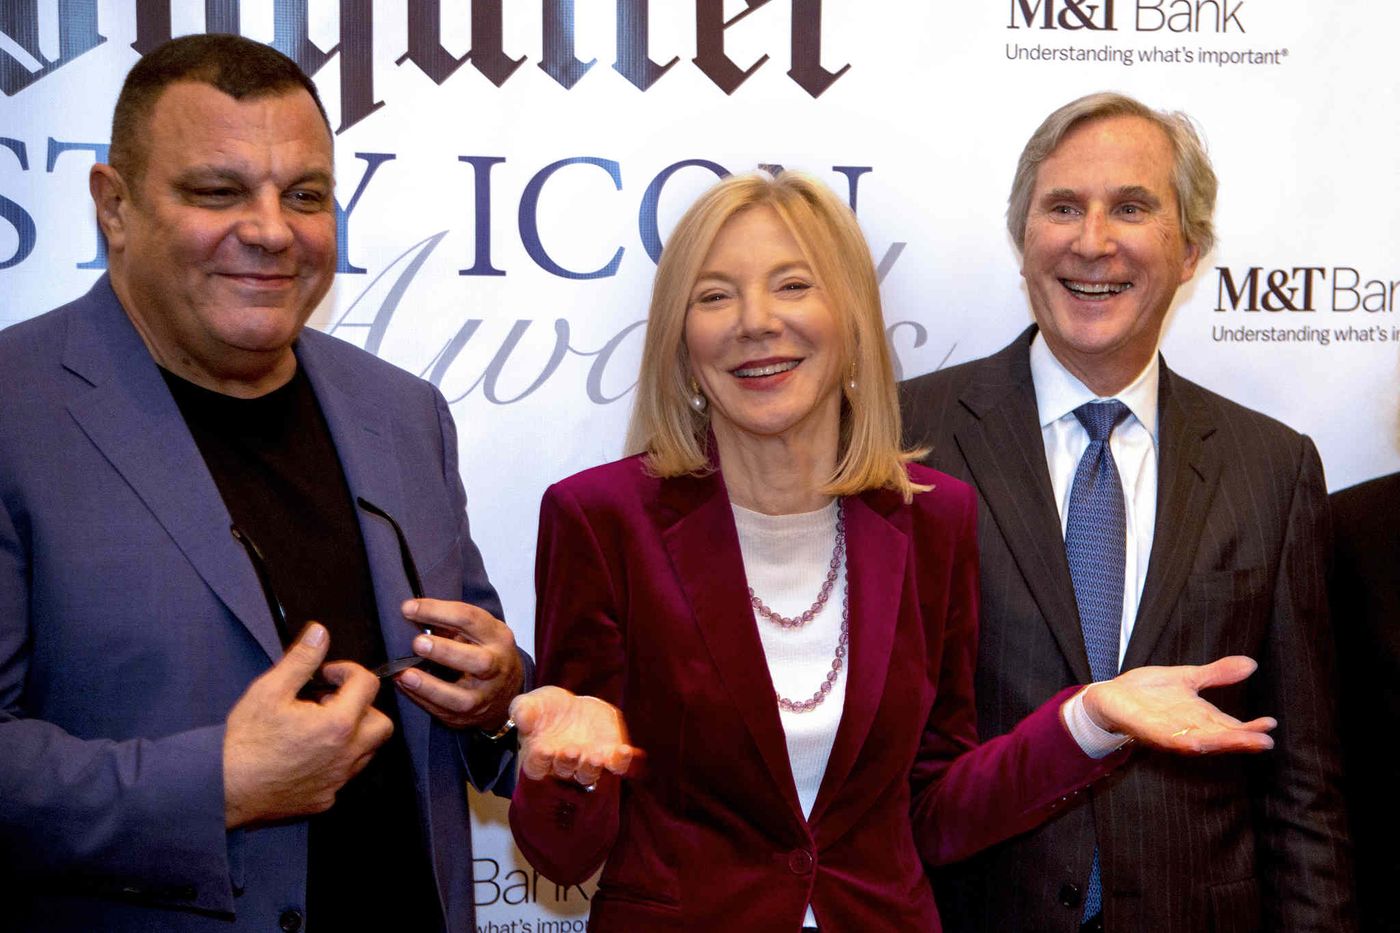 Amy Gutmann smiling at ICON Awards